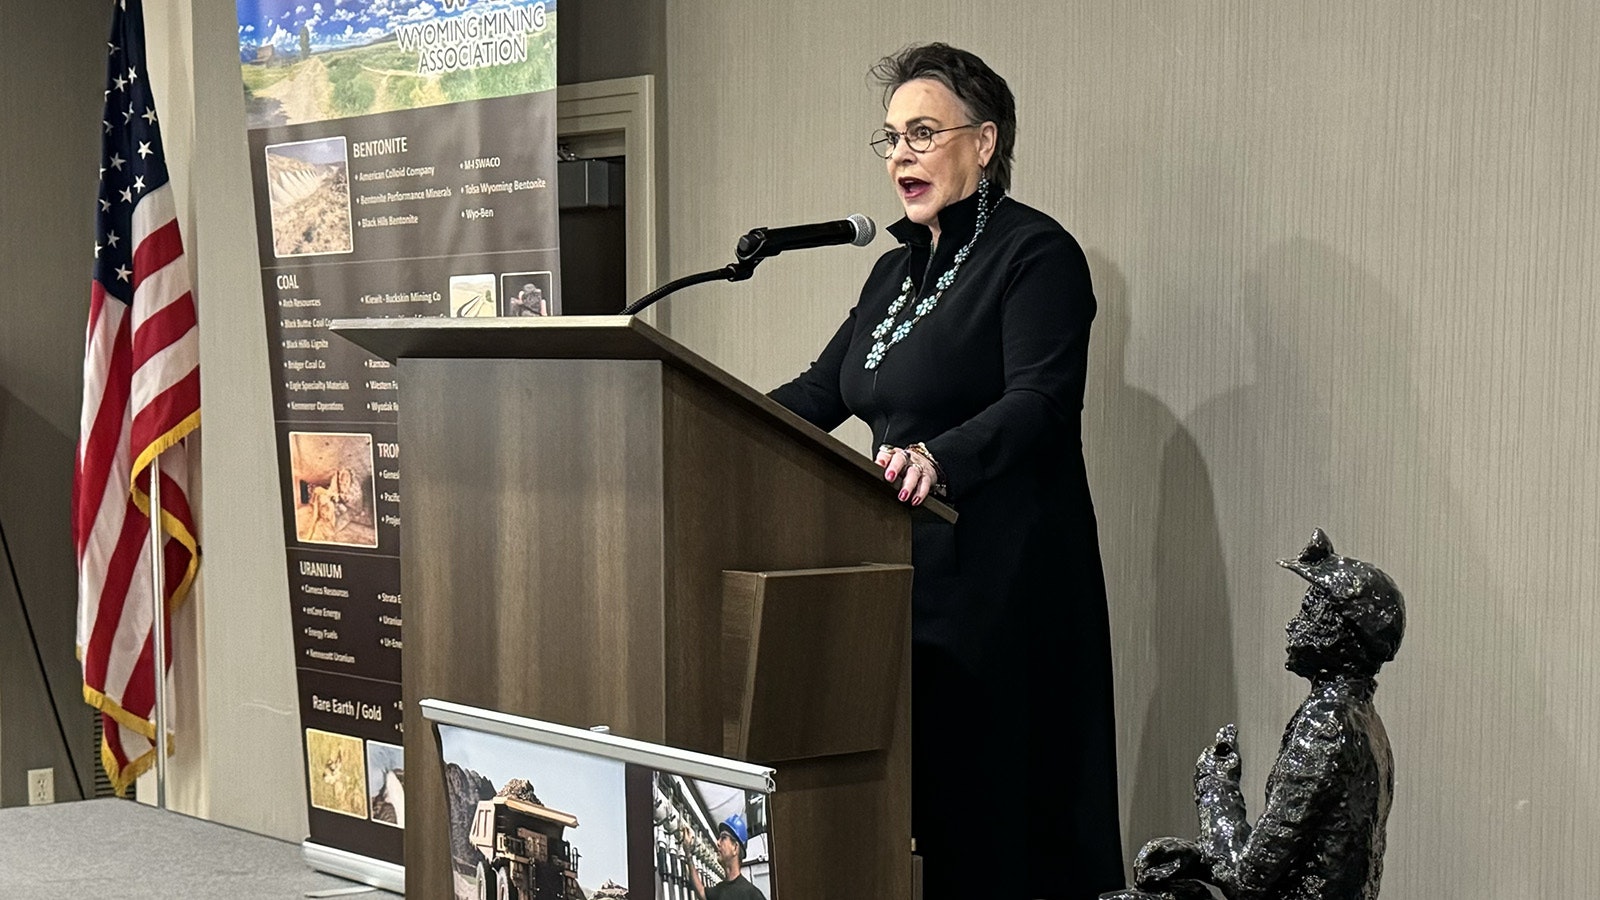 U.S. Rep. Harriet Hageman told the 250 attendees at Wyoming Mining Association’s annual convention in Cody, Wyoming, on Friday, that the city of Boulder, Colorado, should step up as a pilot project among urban cities in the U.S. to see how it gets along without fossil fuels. "We’re living in a la-la land. We’re with unicorns and fairy dust. That doesn’t make sense,” Hageman said.